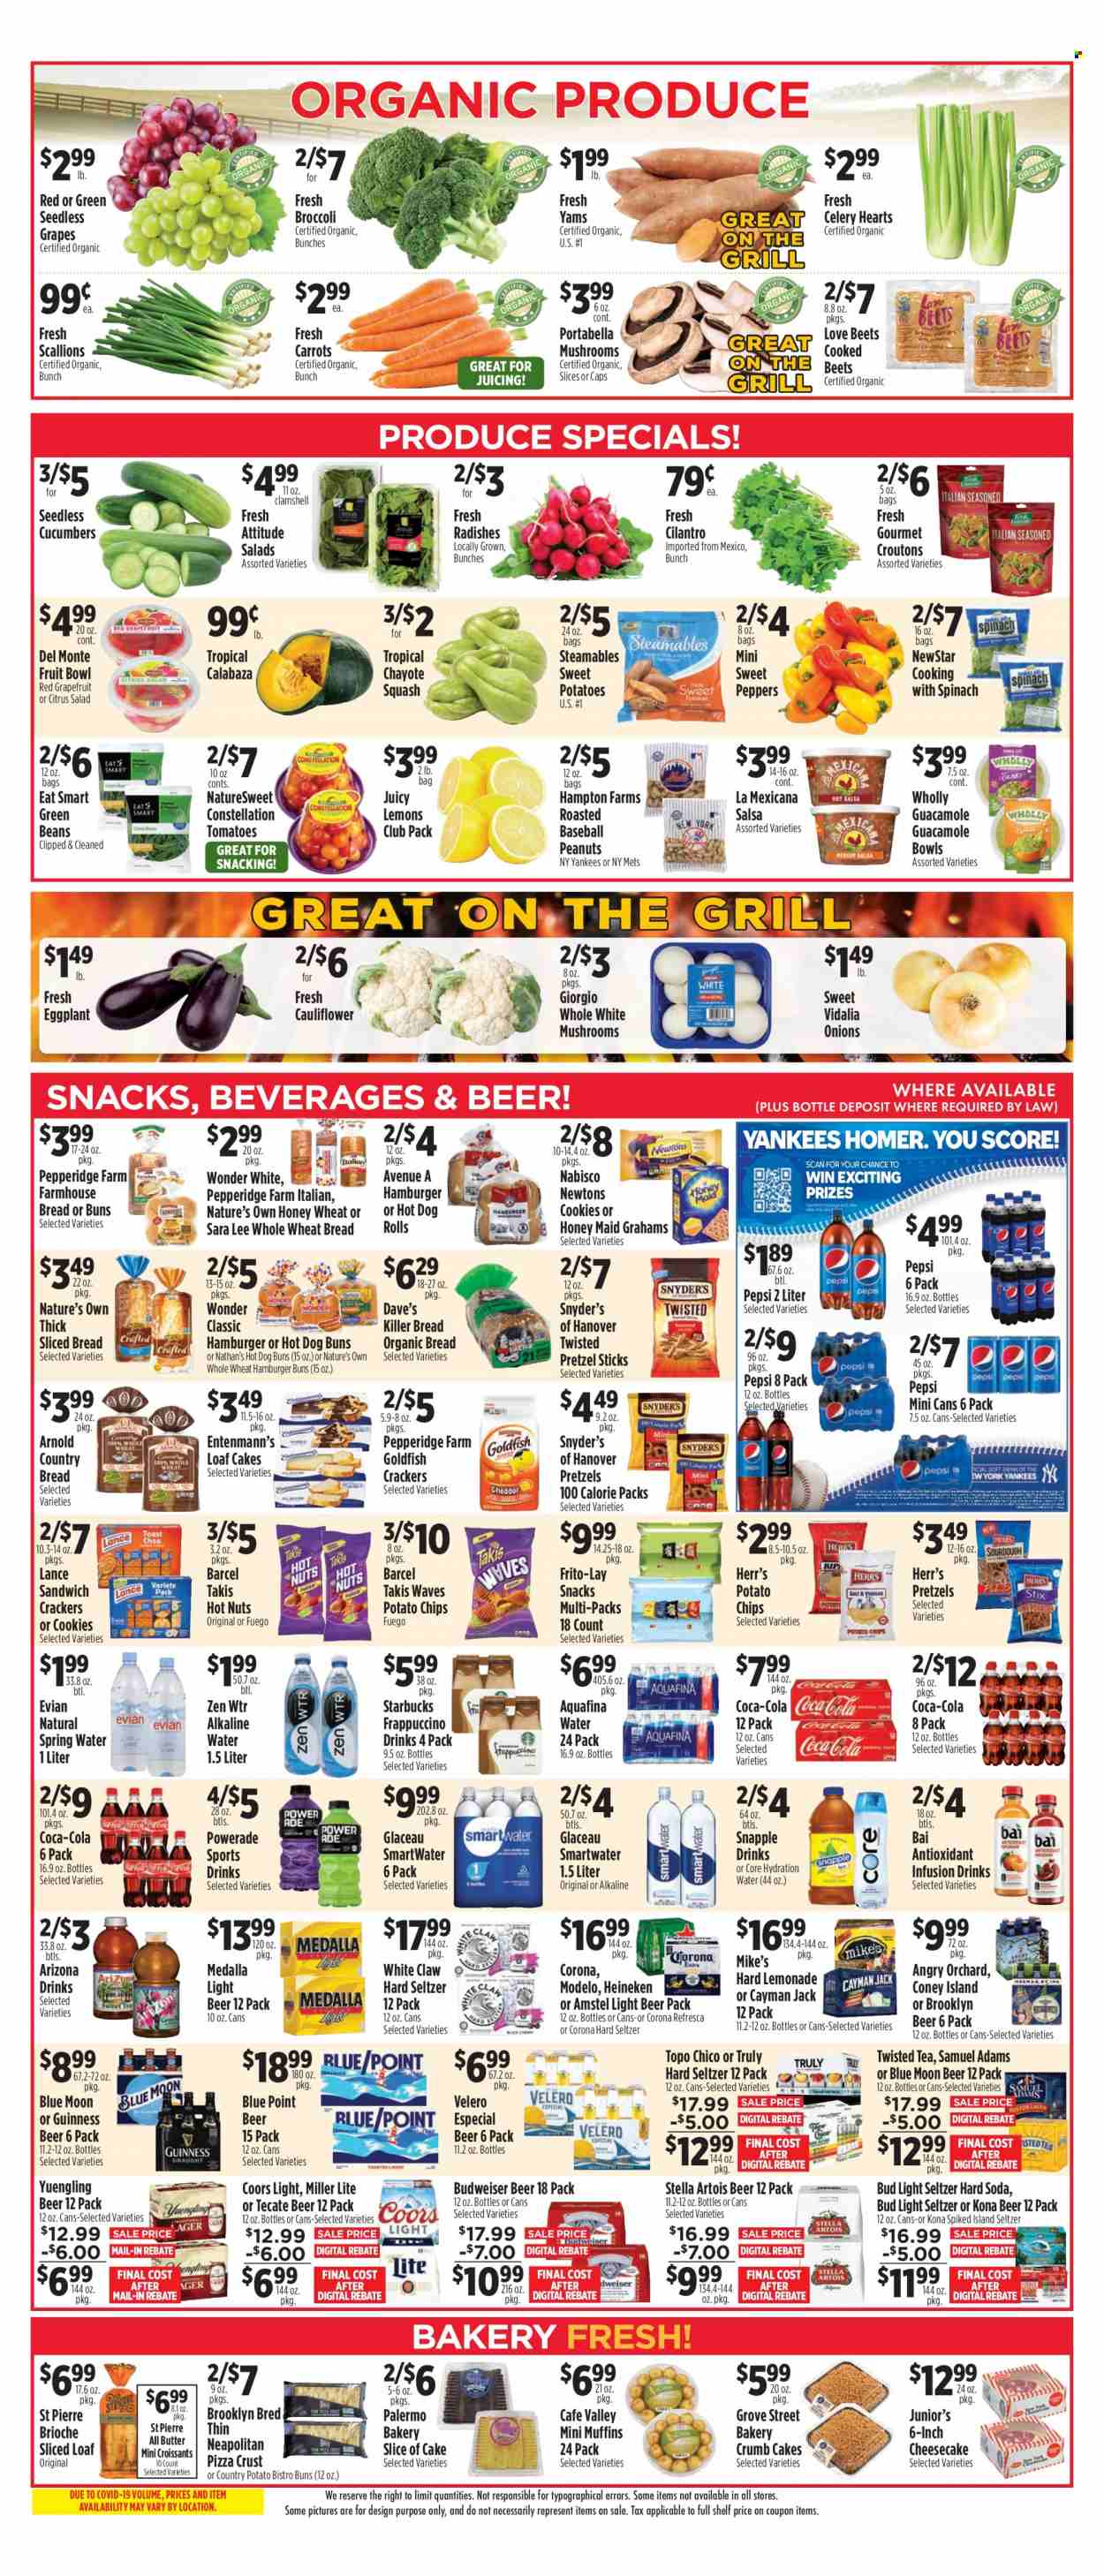 thumbnail - Pioneer Supermarkets Flyer - 08/14/2022 - 08/20/2022 - Sales products - wheat bread, hot dog rolls, pretzels, cake, croissant, buns, burger buns, brioche, Sara Lee, cheesecake, muffin, Entenmann's, beans, broccoli, carrots, celery, cucumber, green beans, radishes, sweet peppers, sweet potato, onion, peppers, eggplant, green onion, sleeved celery, chayote squash, grapefruits, grapes, seedless grapes, chayote, pizza, guacamole, cookies, snack, crackers, potato chips, chips, Goldfish, Frito-Lay, croutons, Del Monte, Honey Maid, cilantro, salsa, peanuts, Coca-Cola, lemonade, Powerade, Pepsi, AriZona, Snapple, Bai, Aquafina, spring water, soda, Smartwater, alkaline water, Evian, tea, Starbucks, frappuccino, White Claw, Hard Seltzer, TRULY, beer, Bud Light, Corona Extra, Heineken, Guinness, Modelo, Brooklyn Beer, Budweiser, Miller Lite, Stella Artois, Coors, Blue Moon, Twisted Tea, Yuengling, lemons. Page 6.